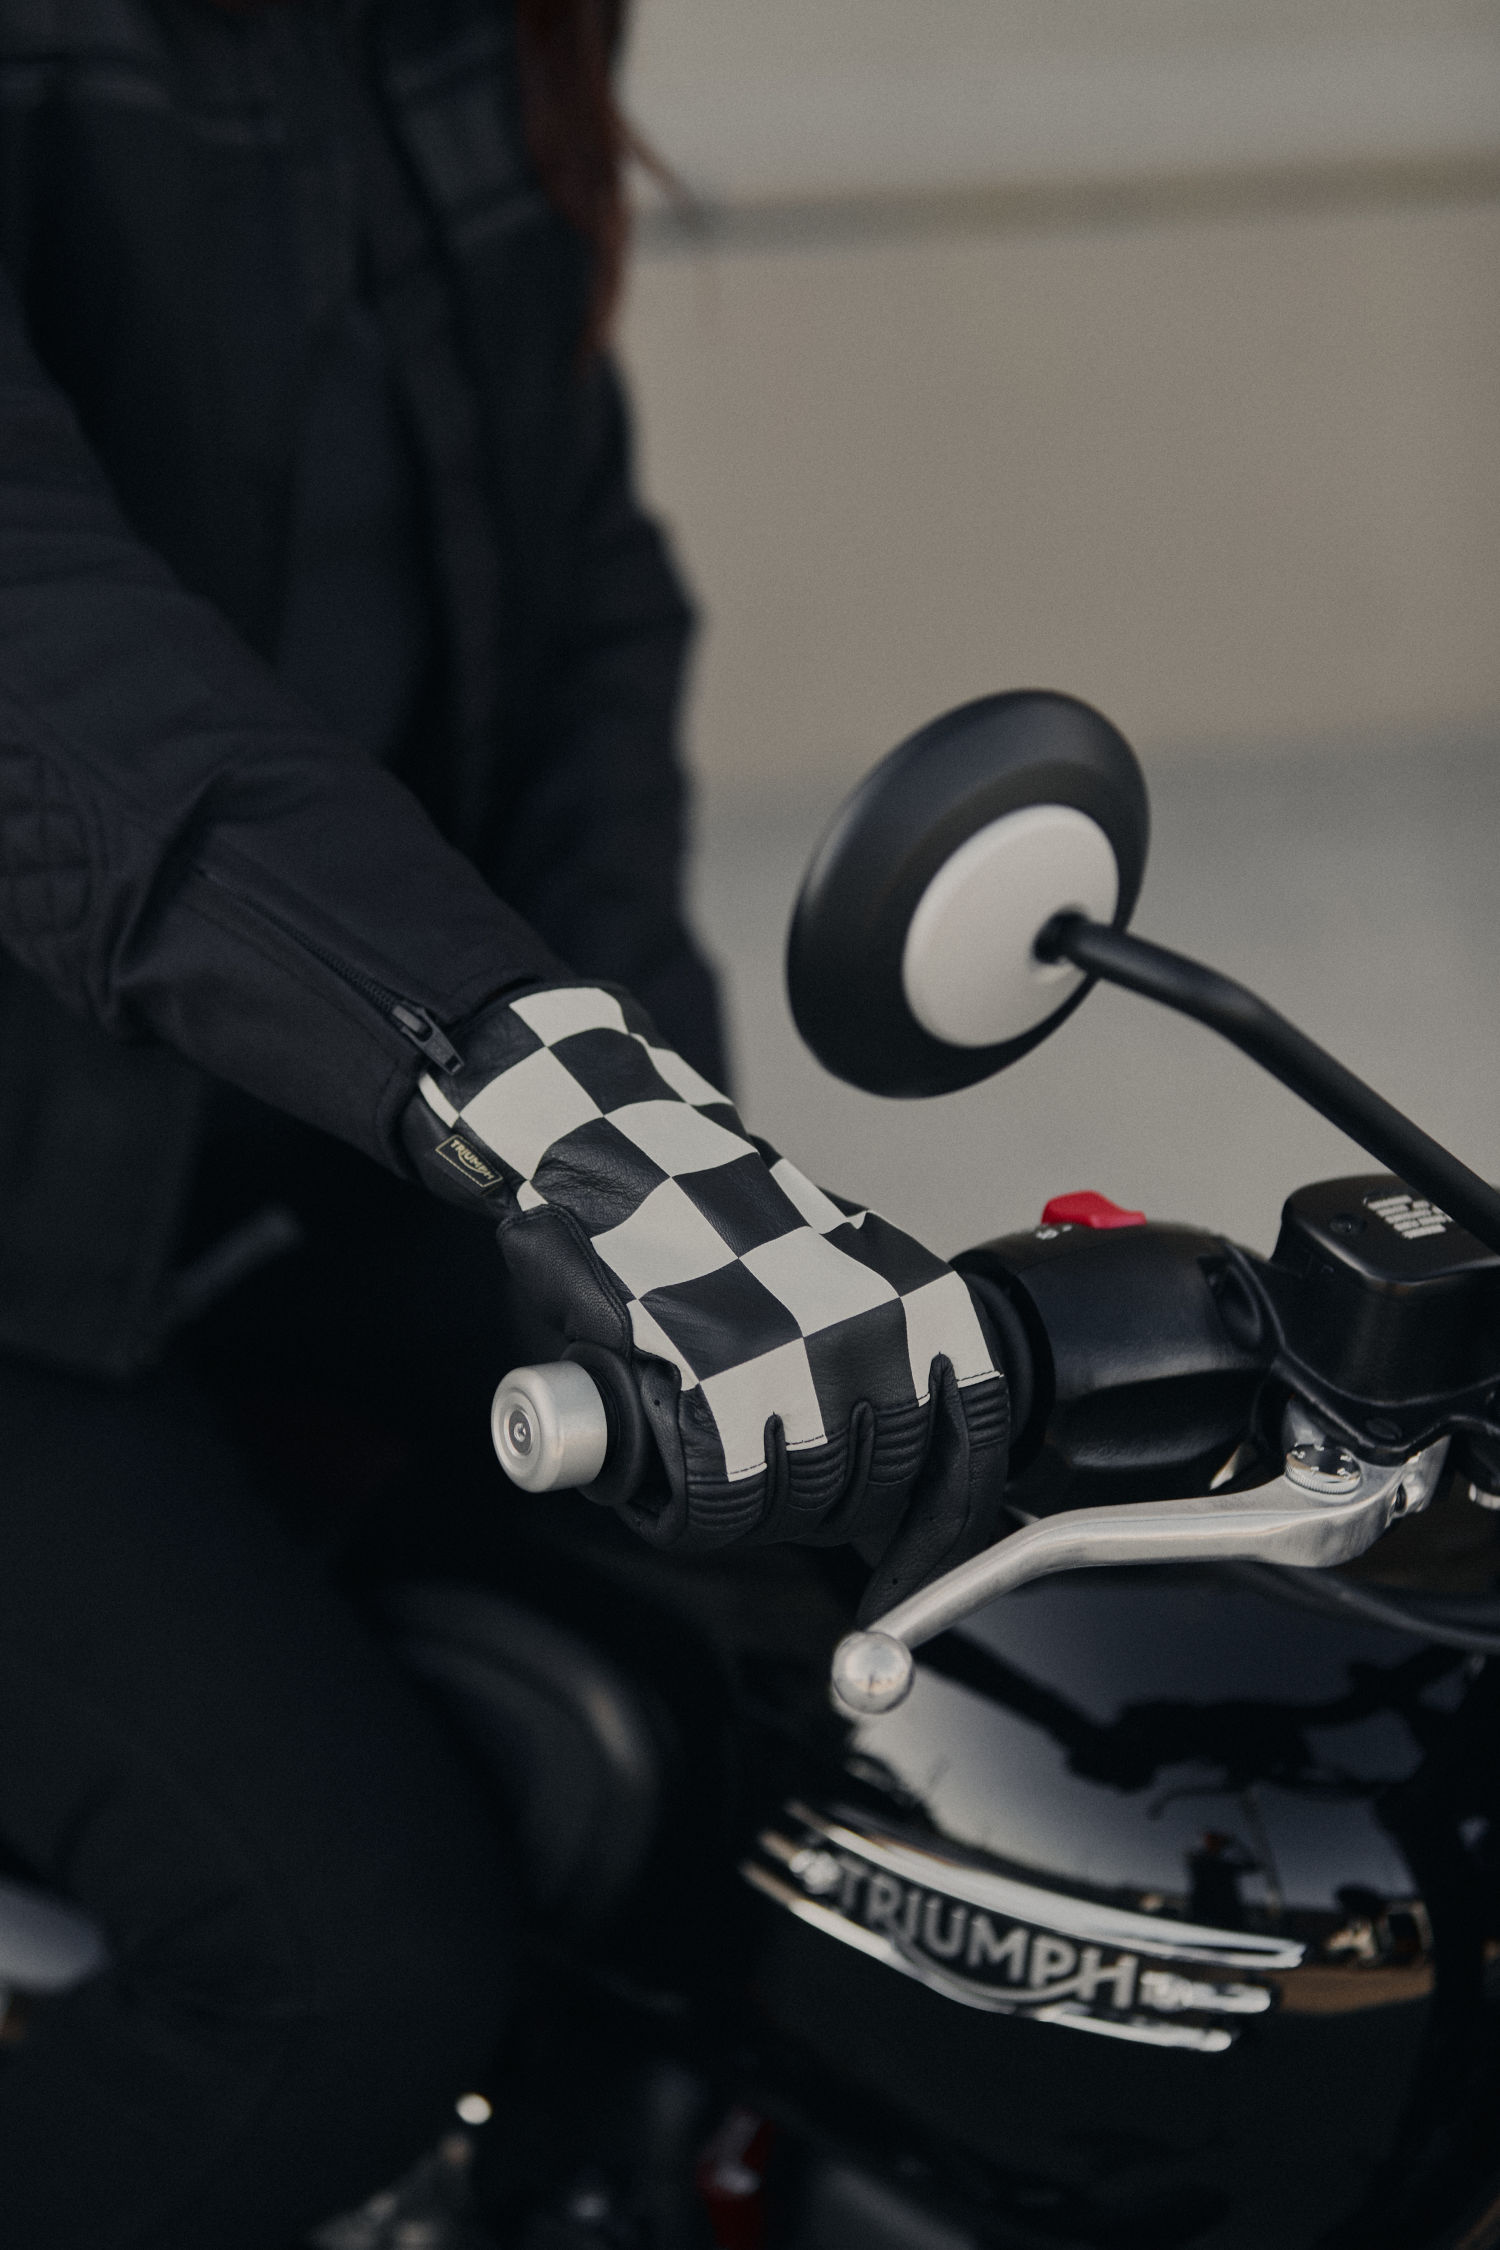 Checkerboard Leather Gloves